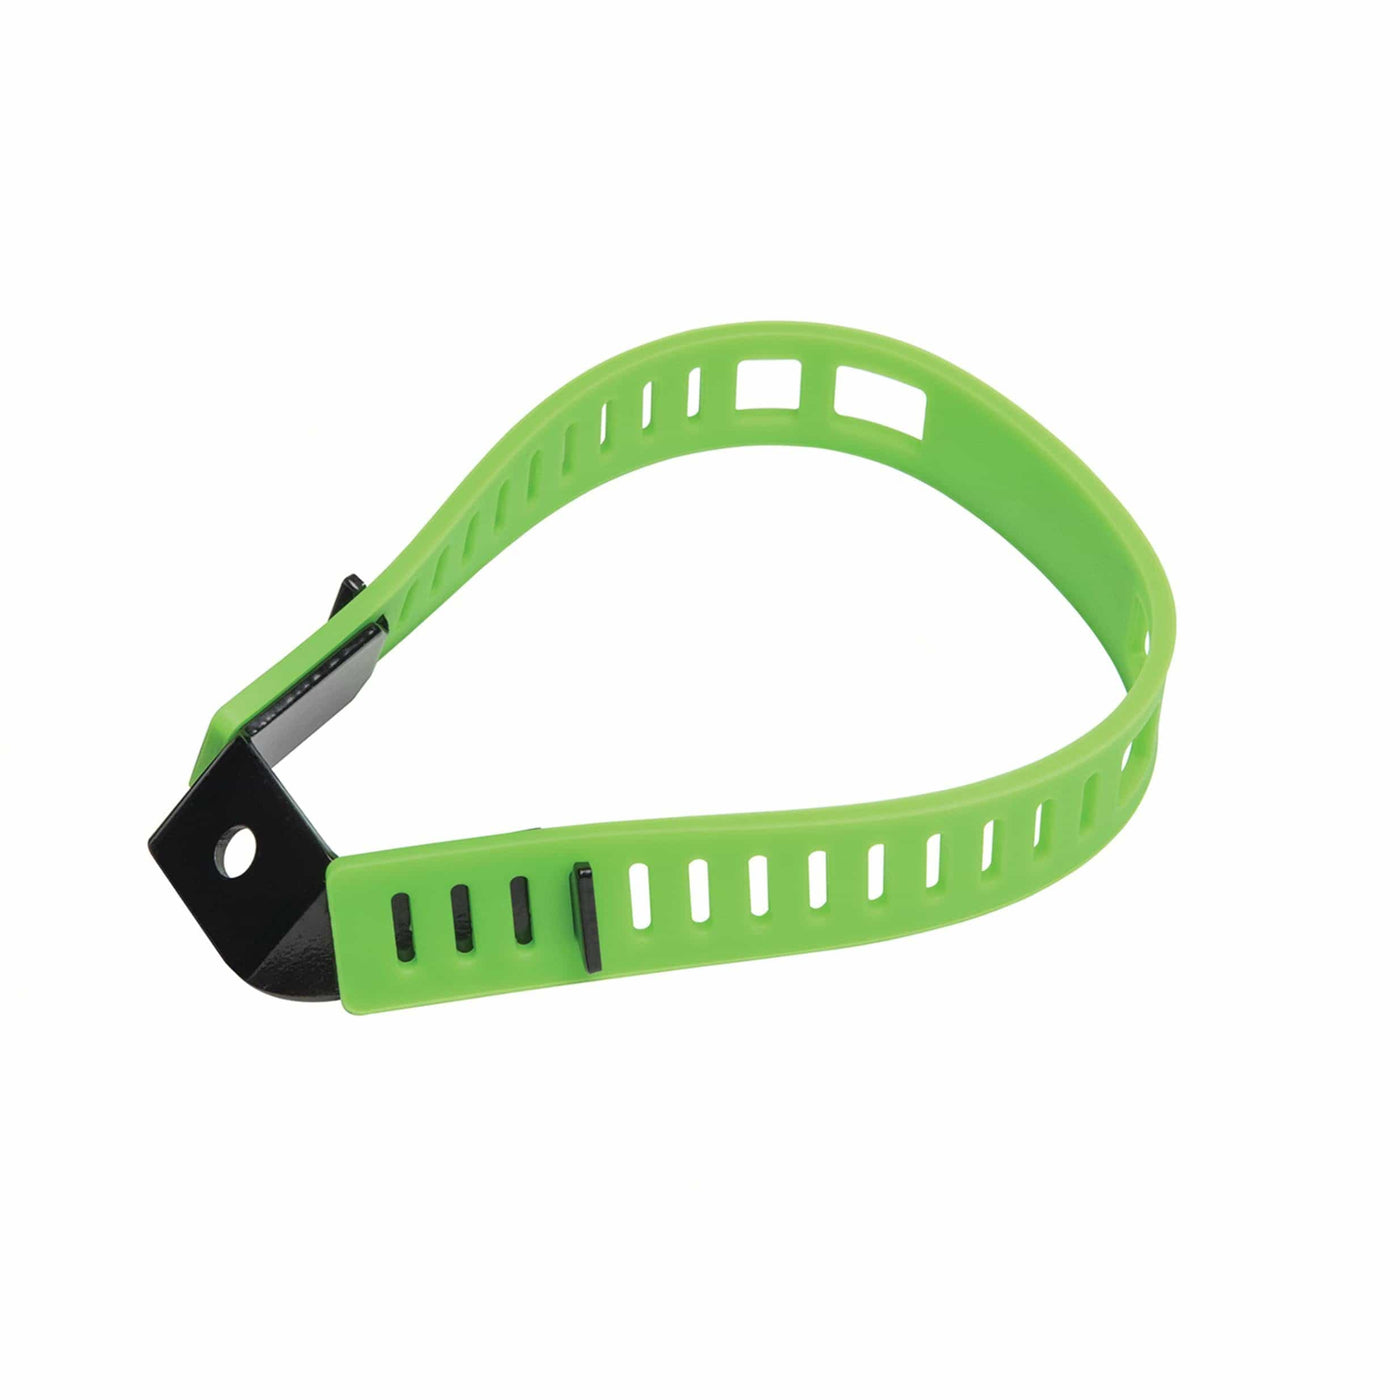 .30-06 Outdoors .30-06 OUTDOORS BOA Compound Wrist Sling Green Archery